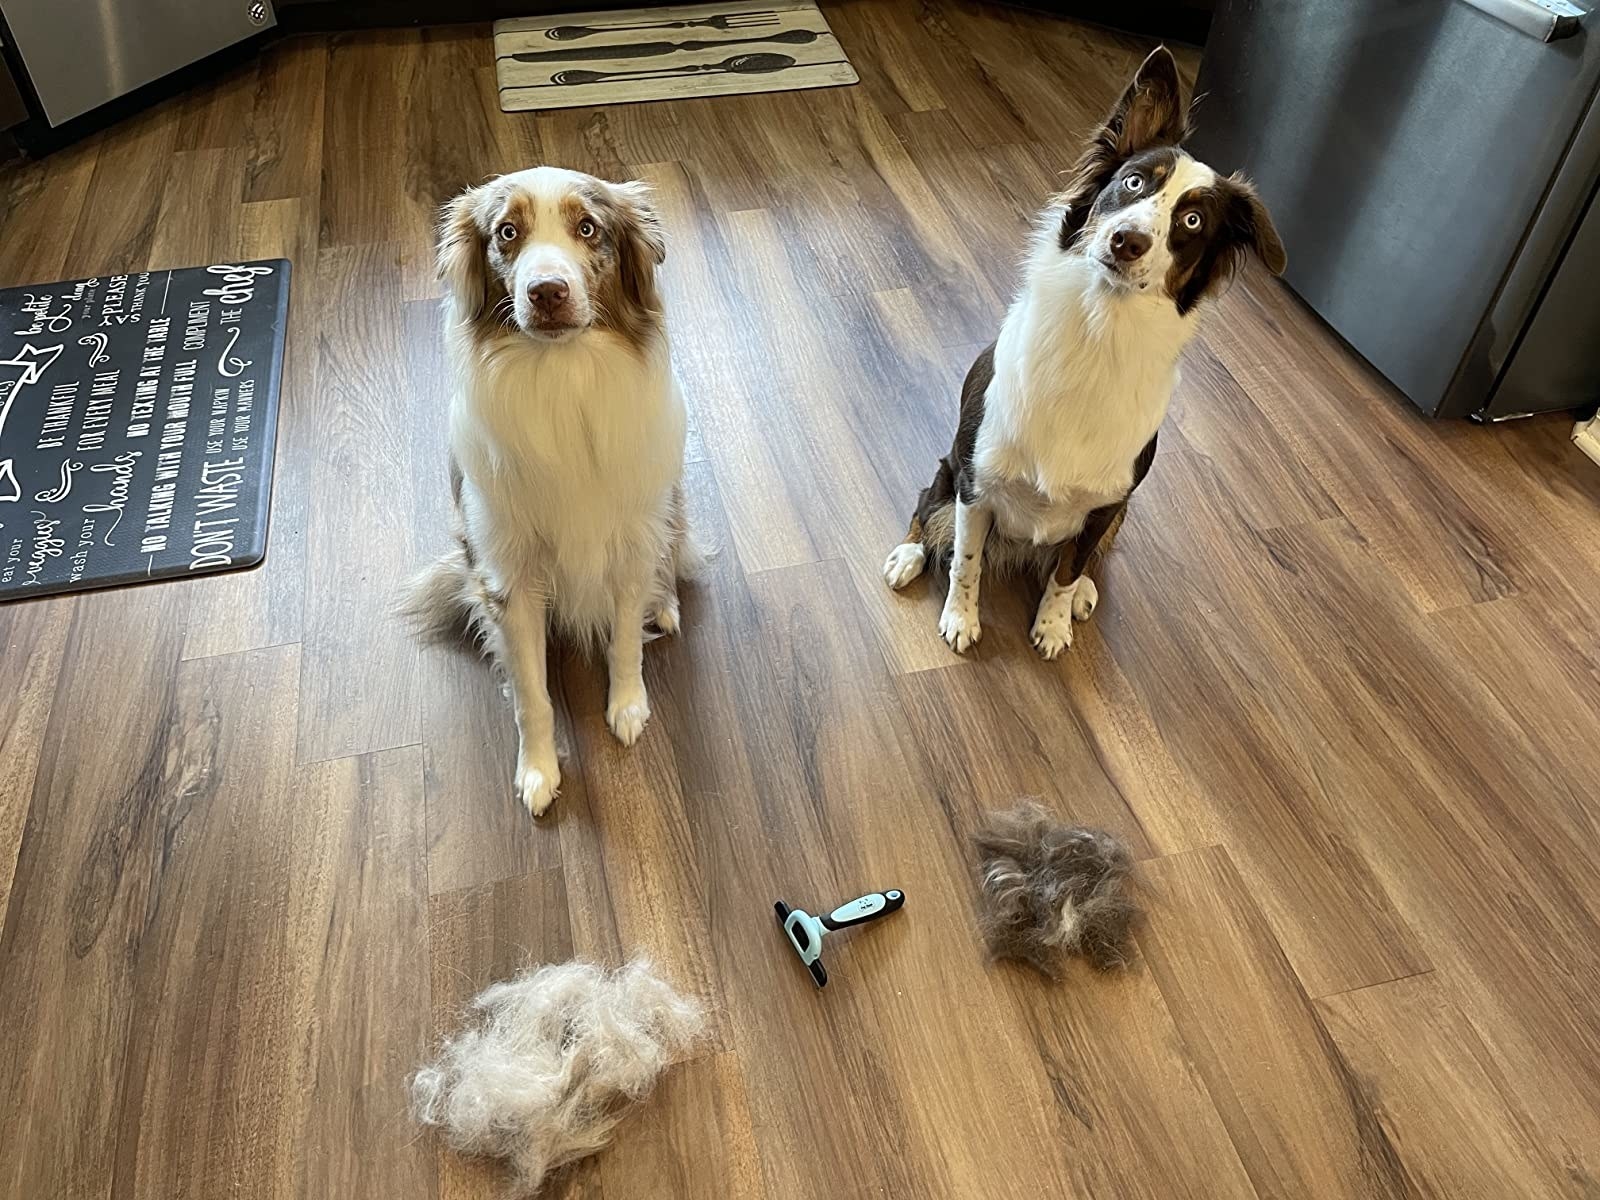 Two big piles of dog hair next to the pet grooming brush on the ground, and the two freshly groomed dogs sitting nearby